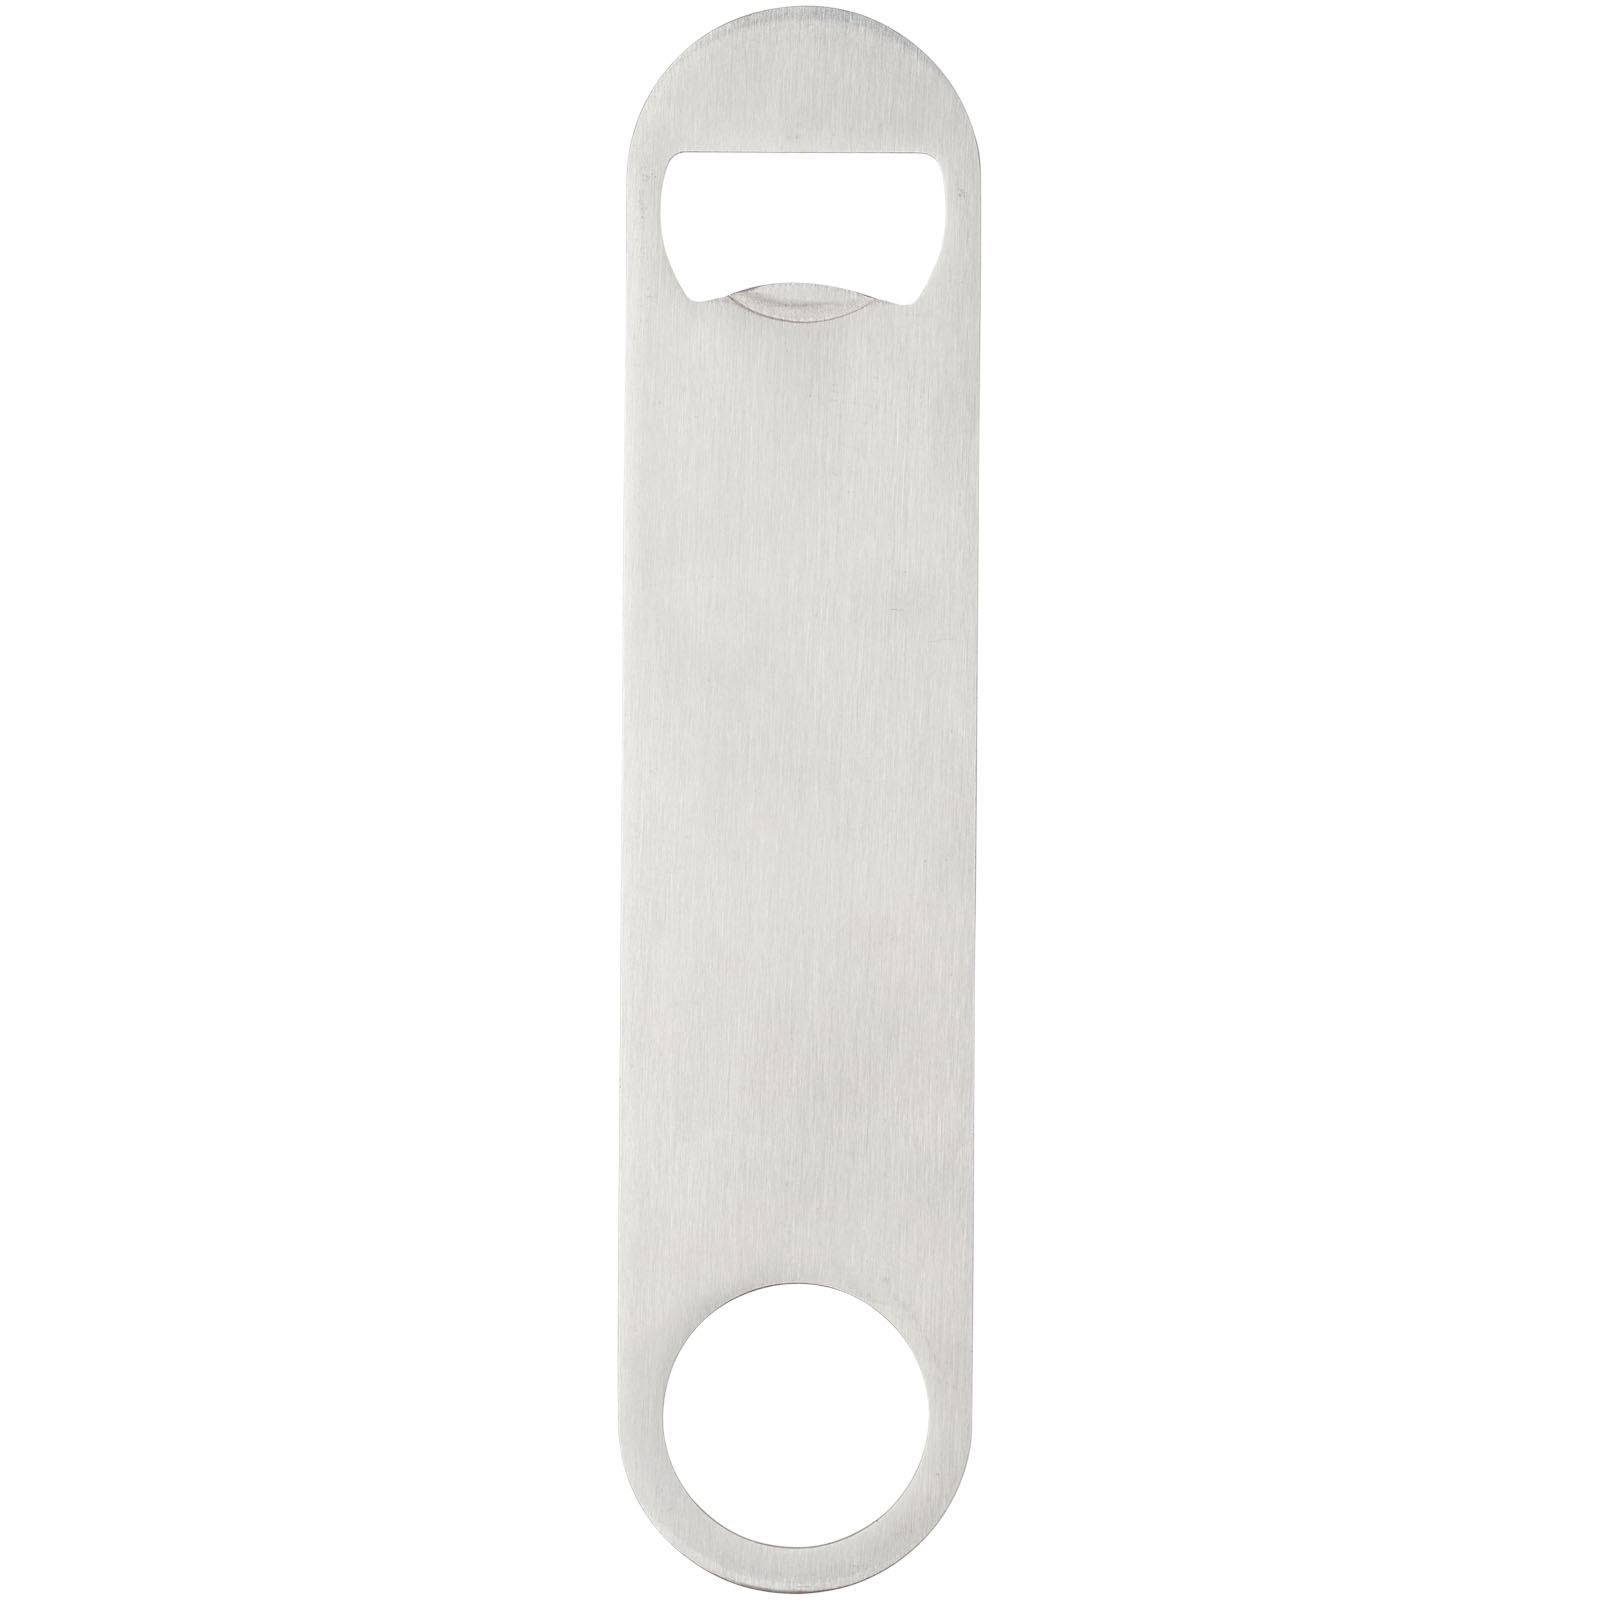 Advertising Bottle Openers & Accessories - Paddle bottle opener - 1